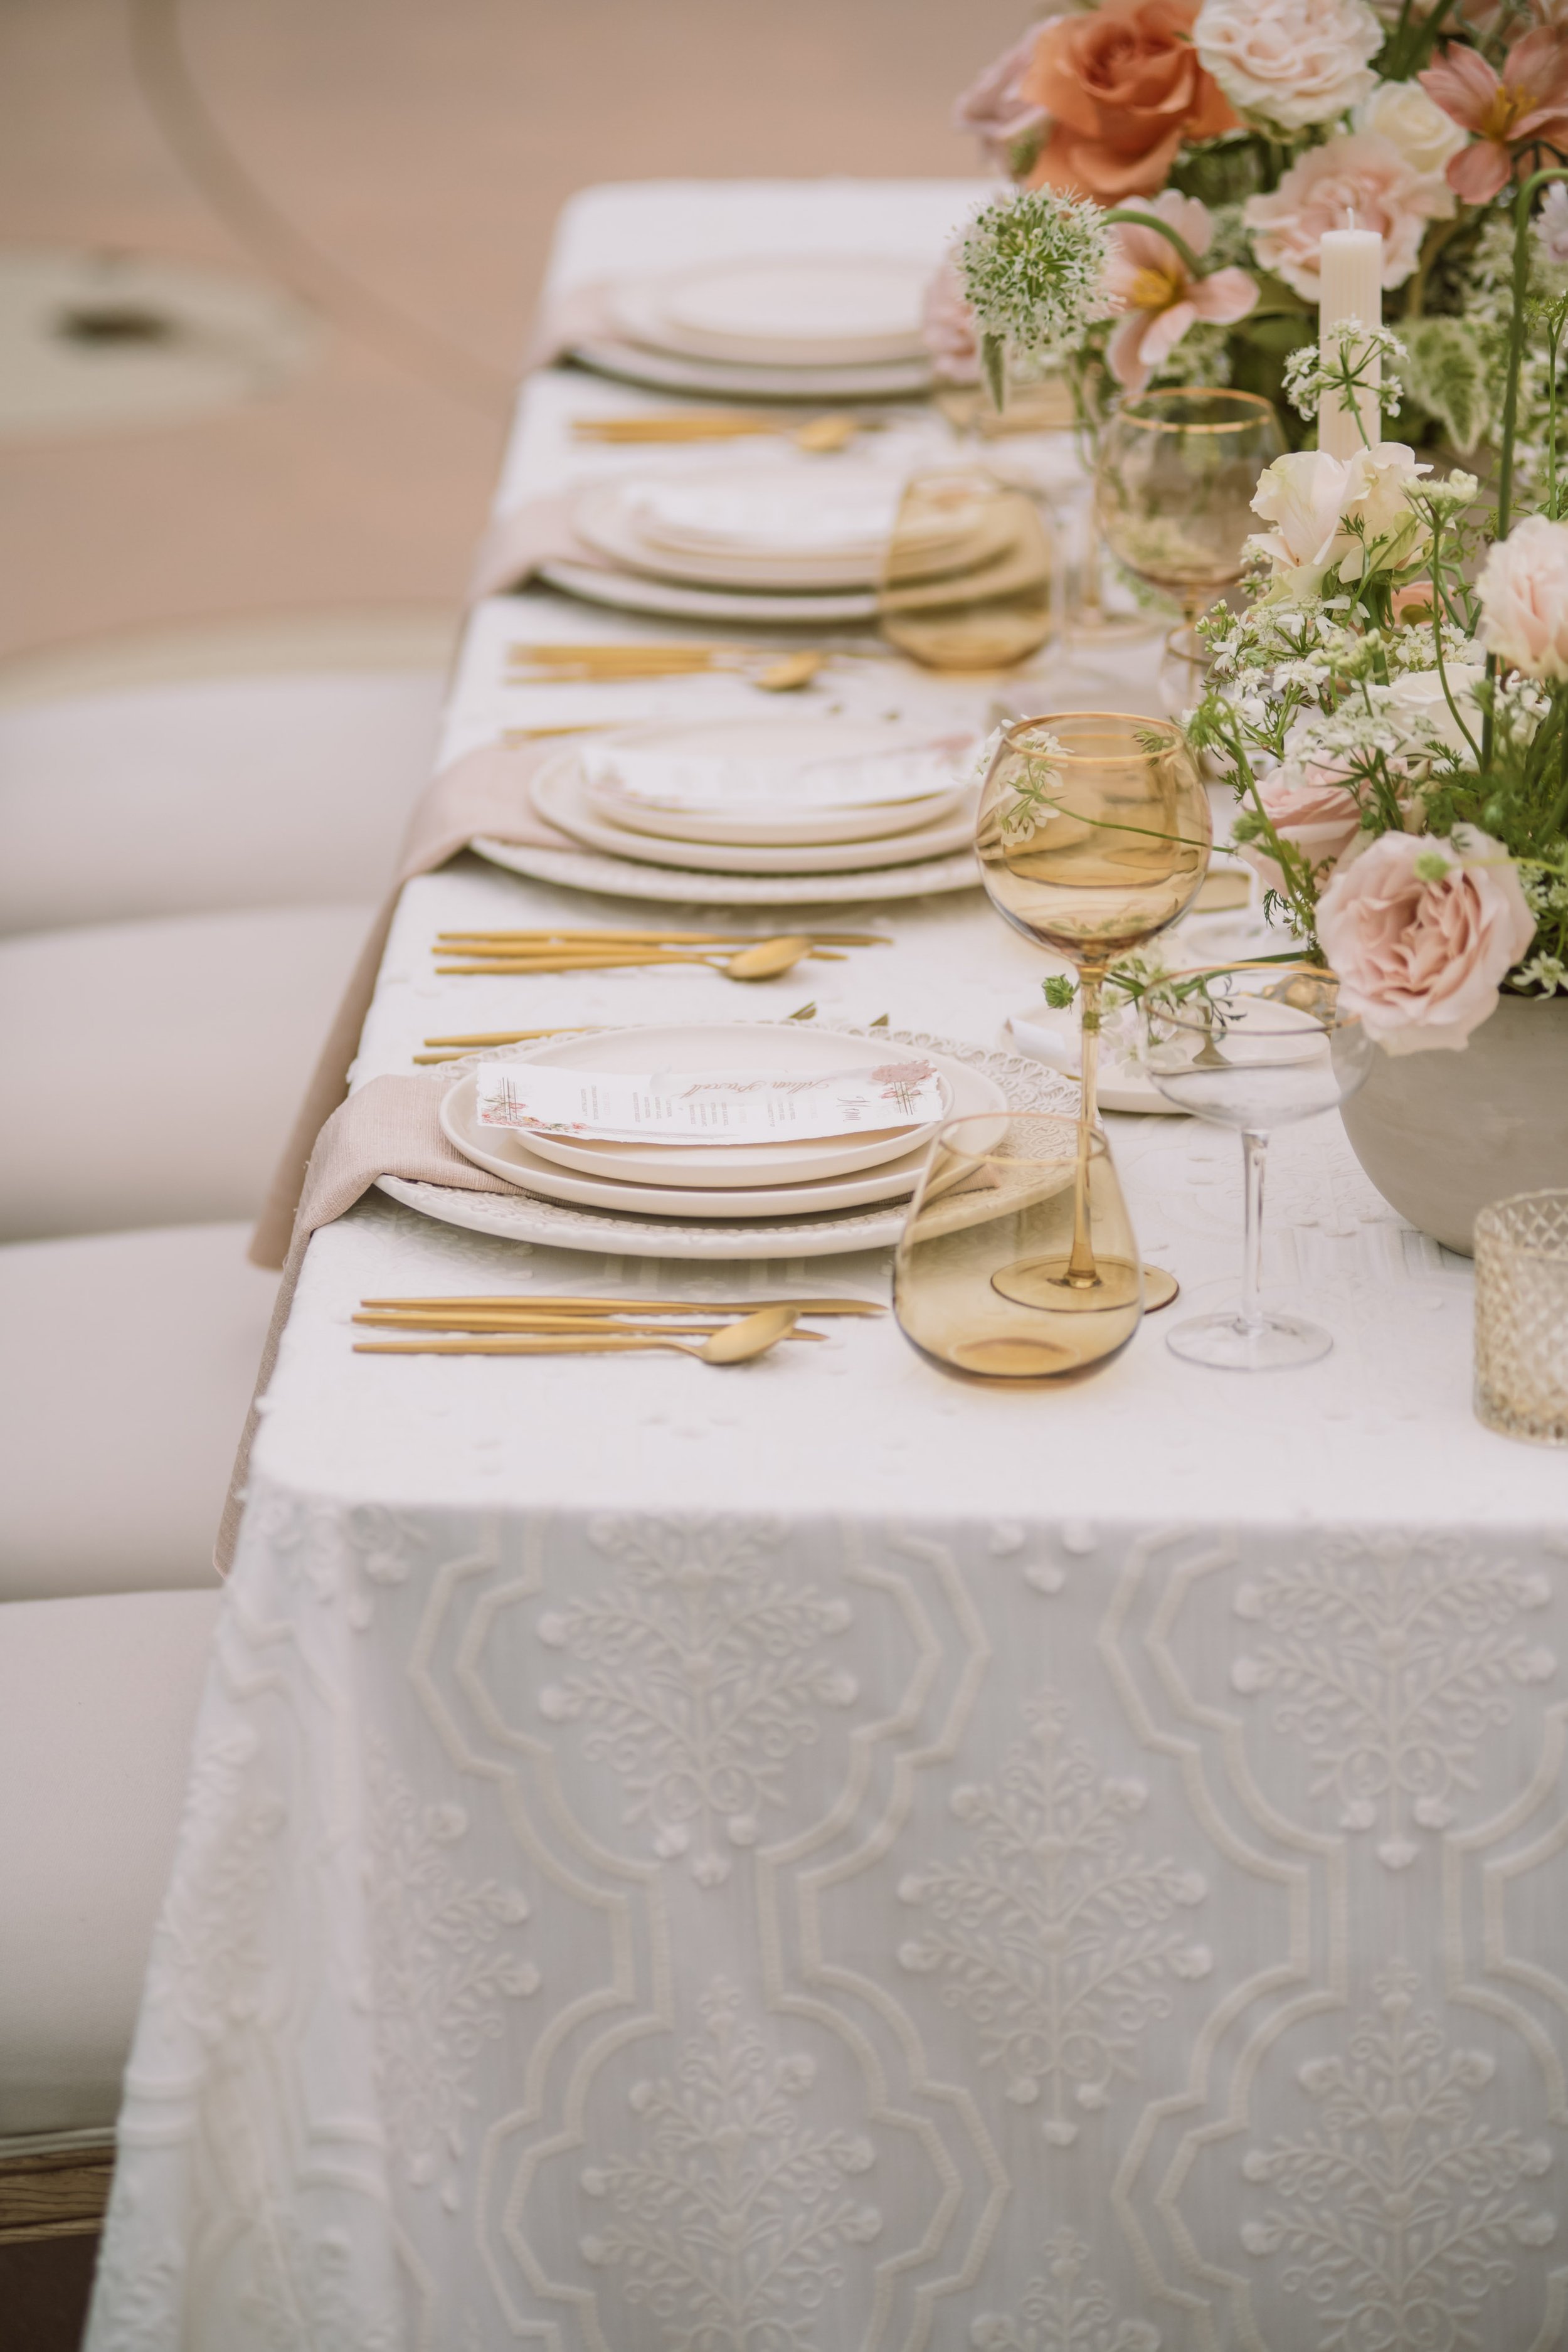 Place Settings Stone Mountain Estates Wedding Venue Fancy This Photography